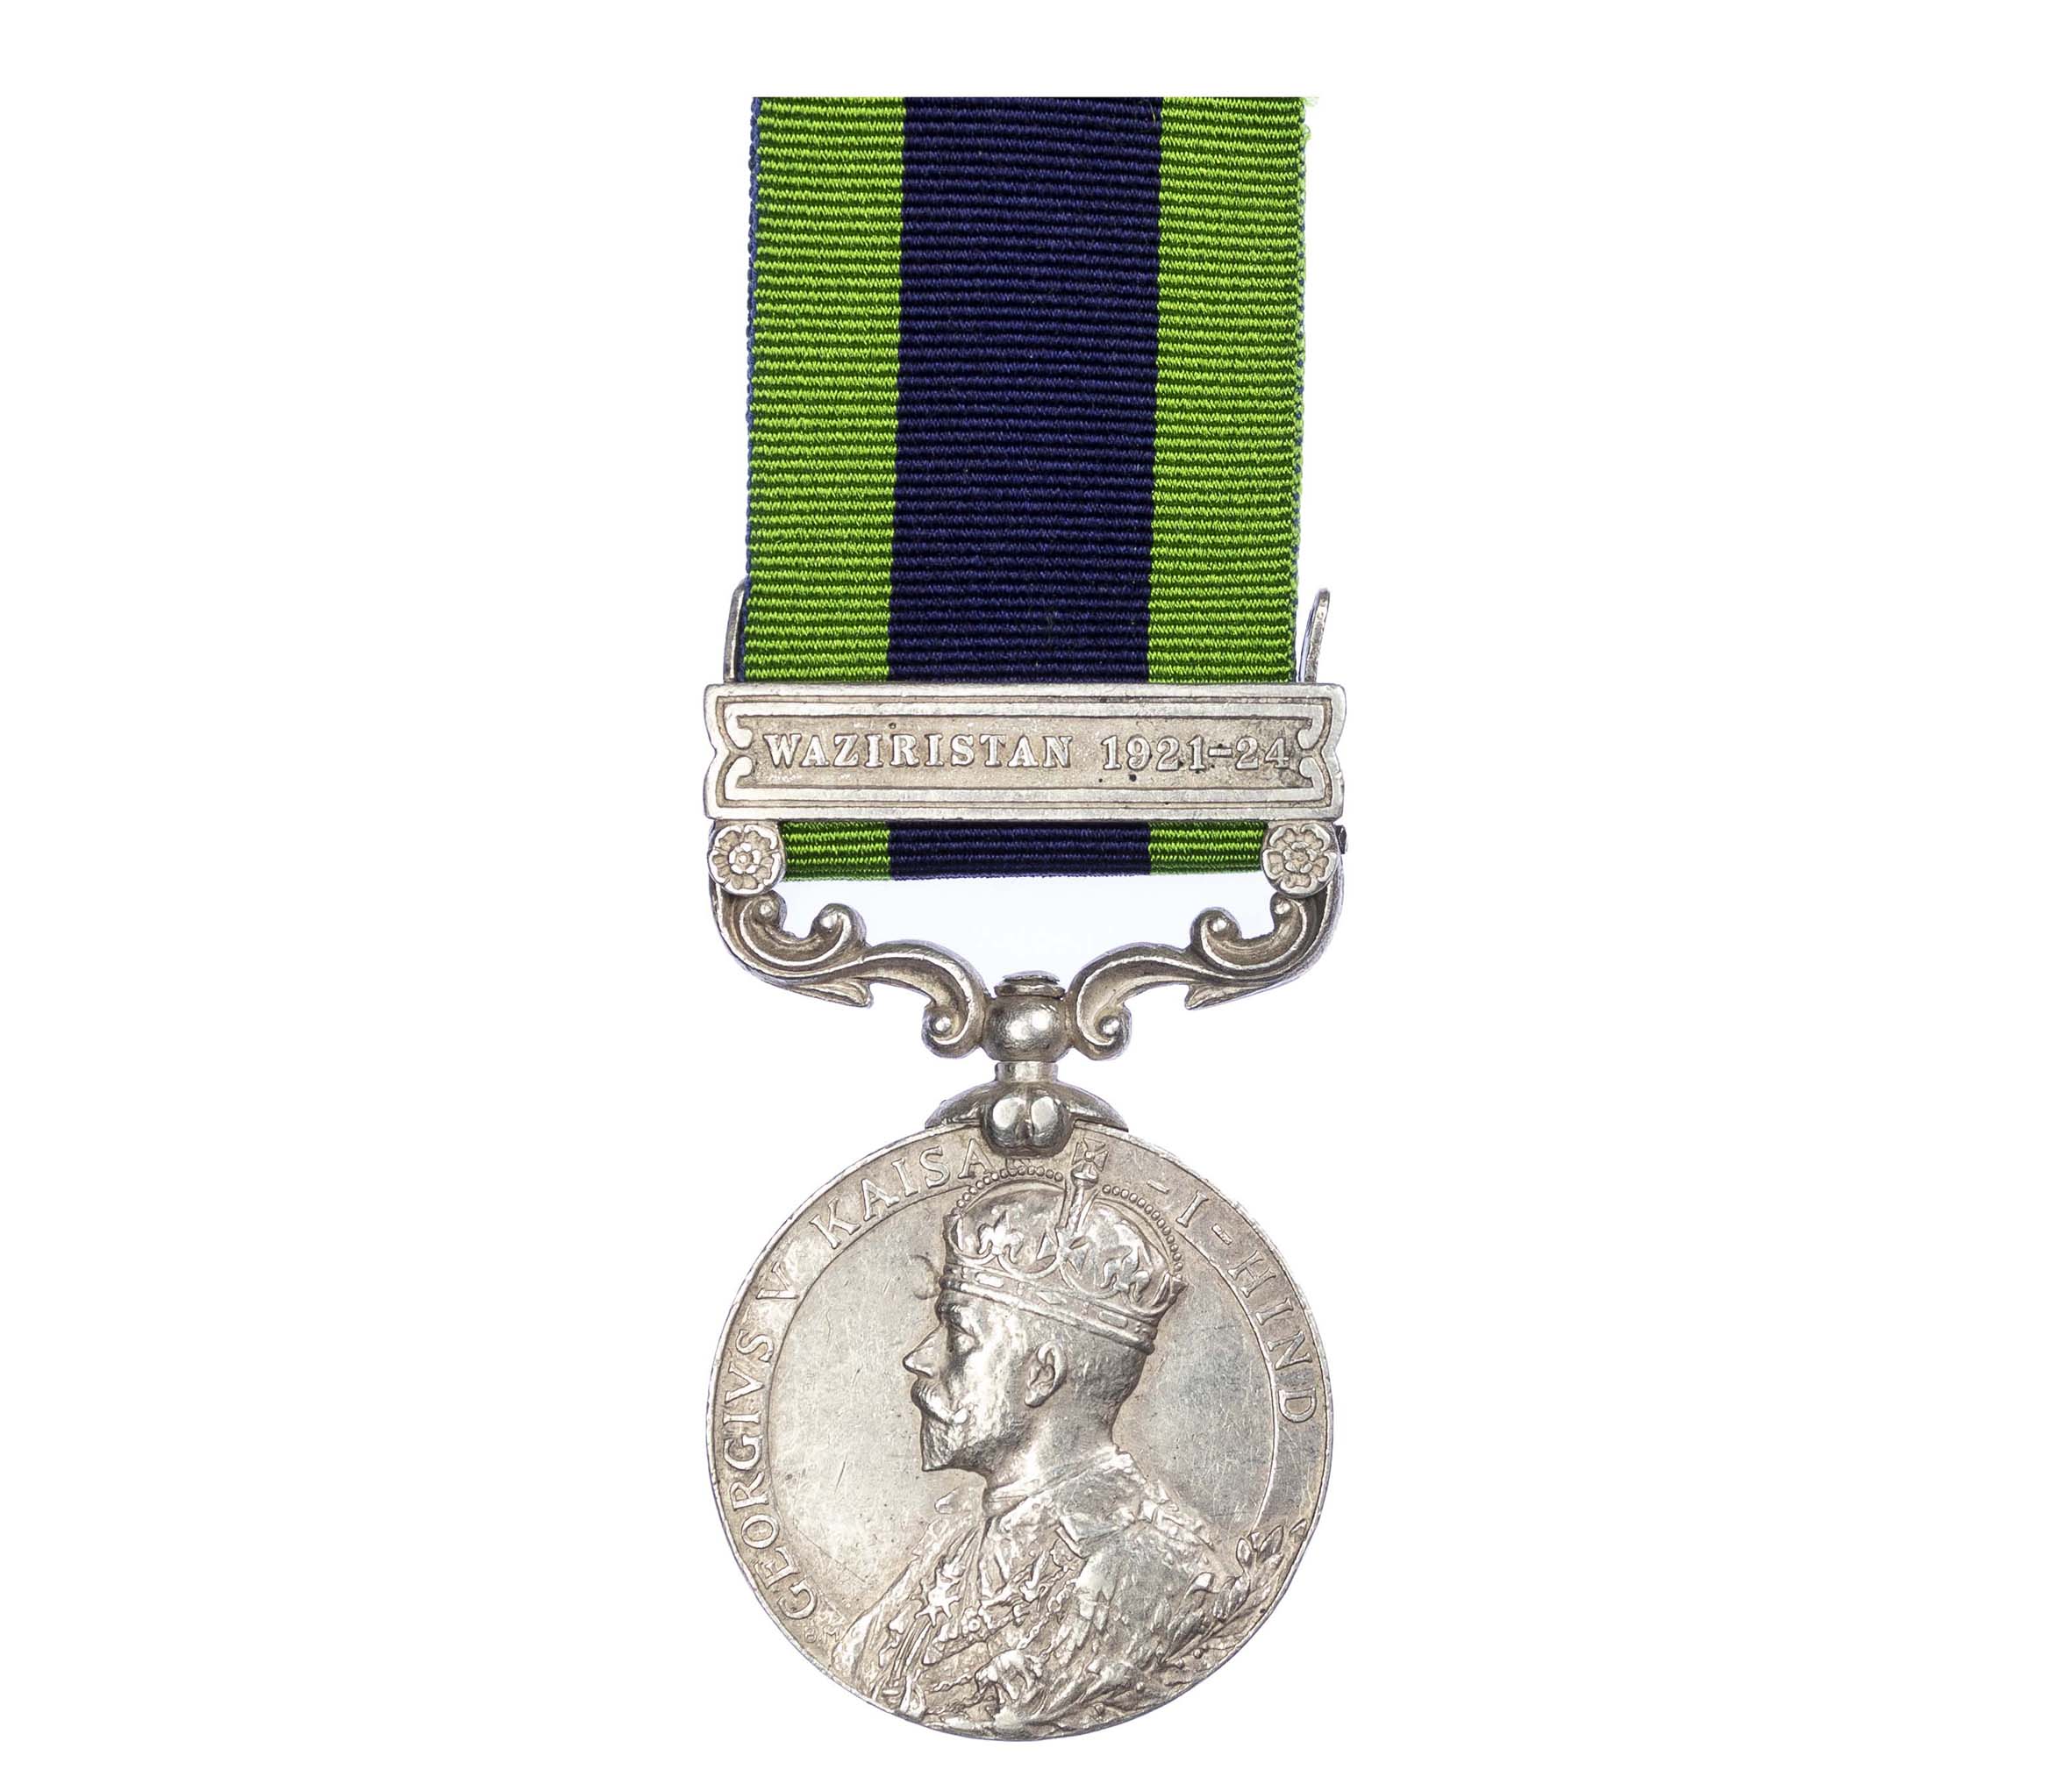 India General Service Medal 1908-1935, GVR, one clasp Waziristan 1921-24, to Sepoy Hari Singh